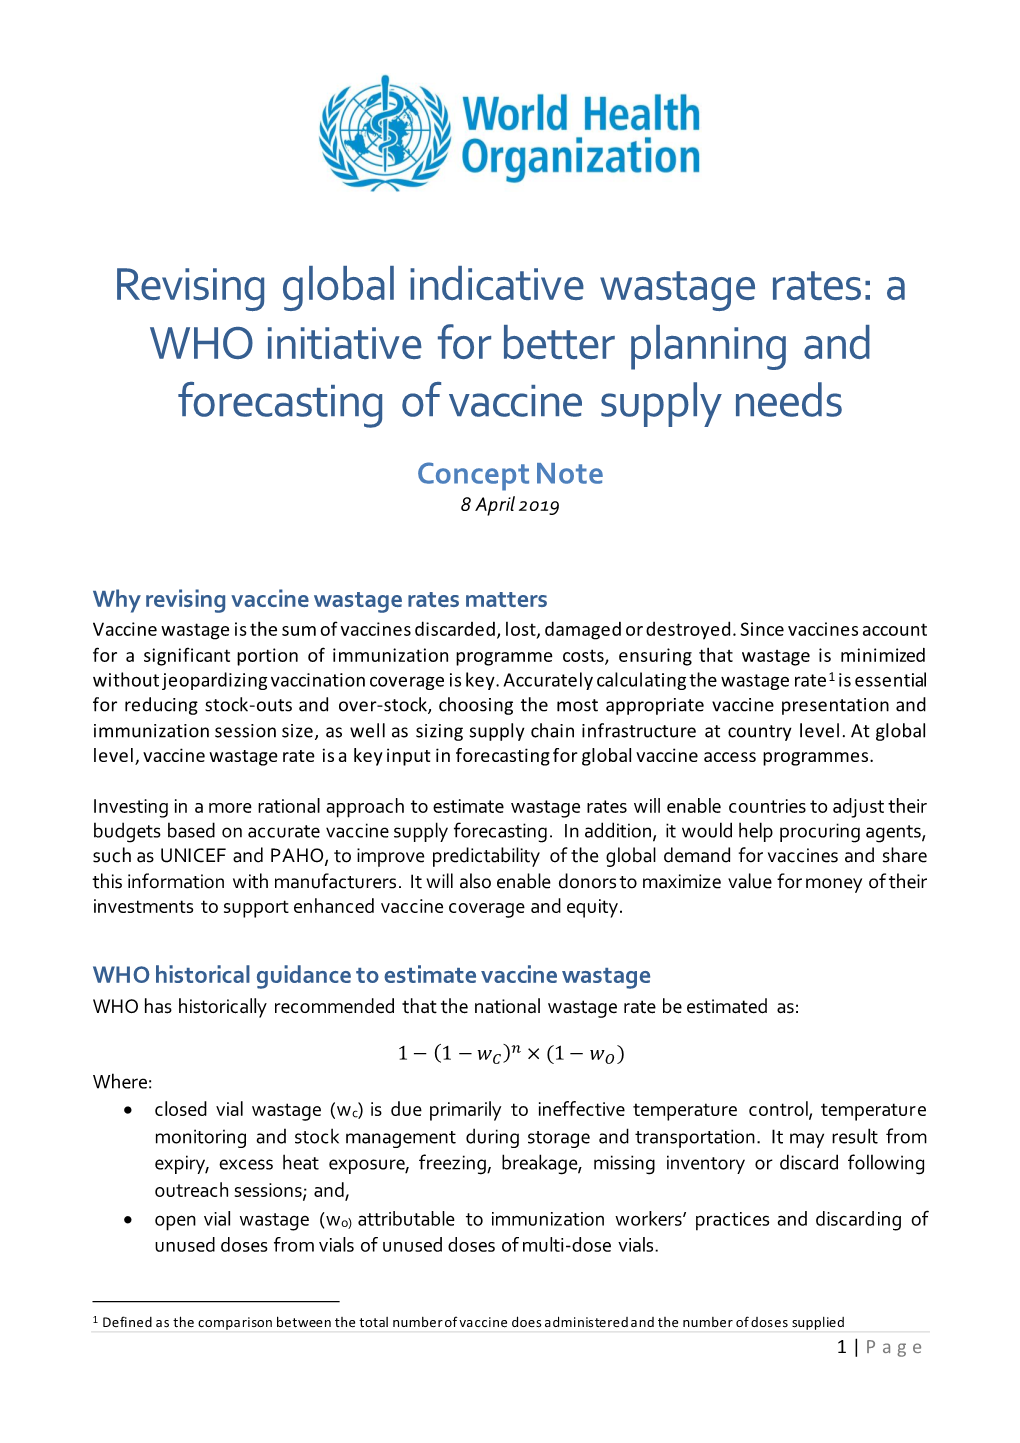 Revising Global Indicative Wastage Rates: a WHO Initiative for Better Planning and Forecasting of Vaccine Supply Needs